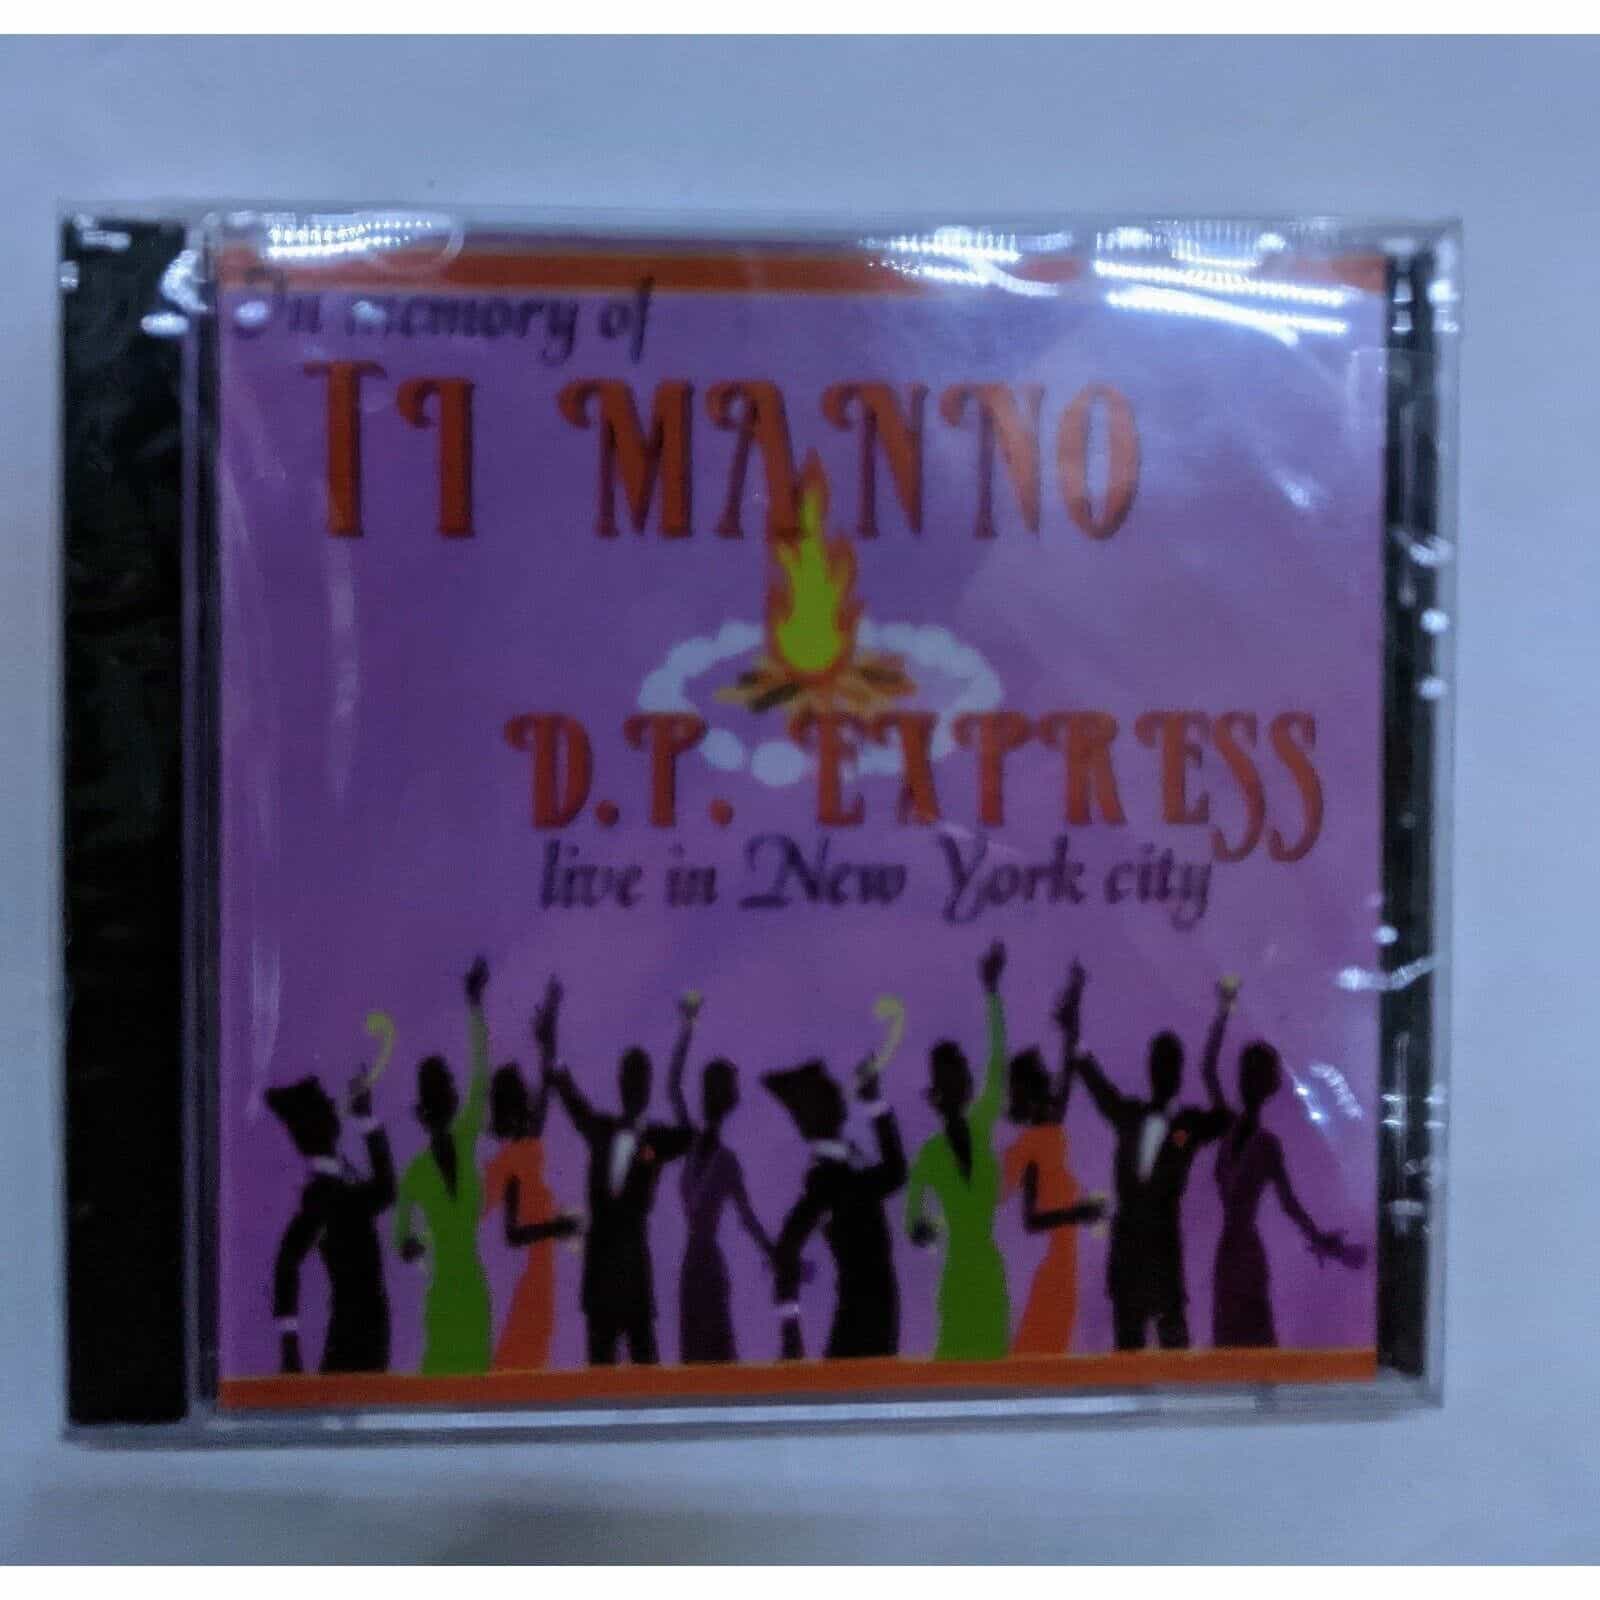 In Memory of TI Manto Music Album by D.P. Express (Live In New York City)